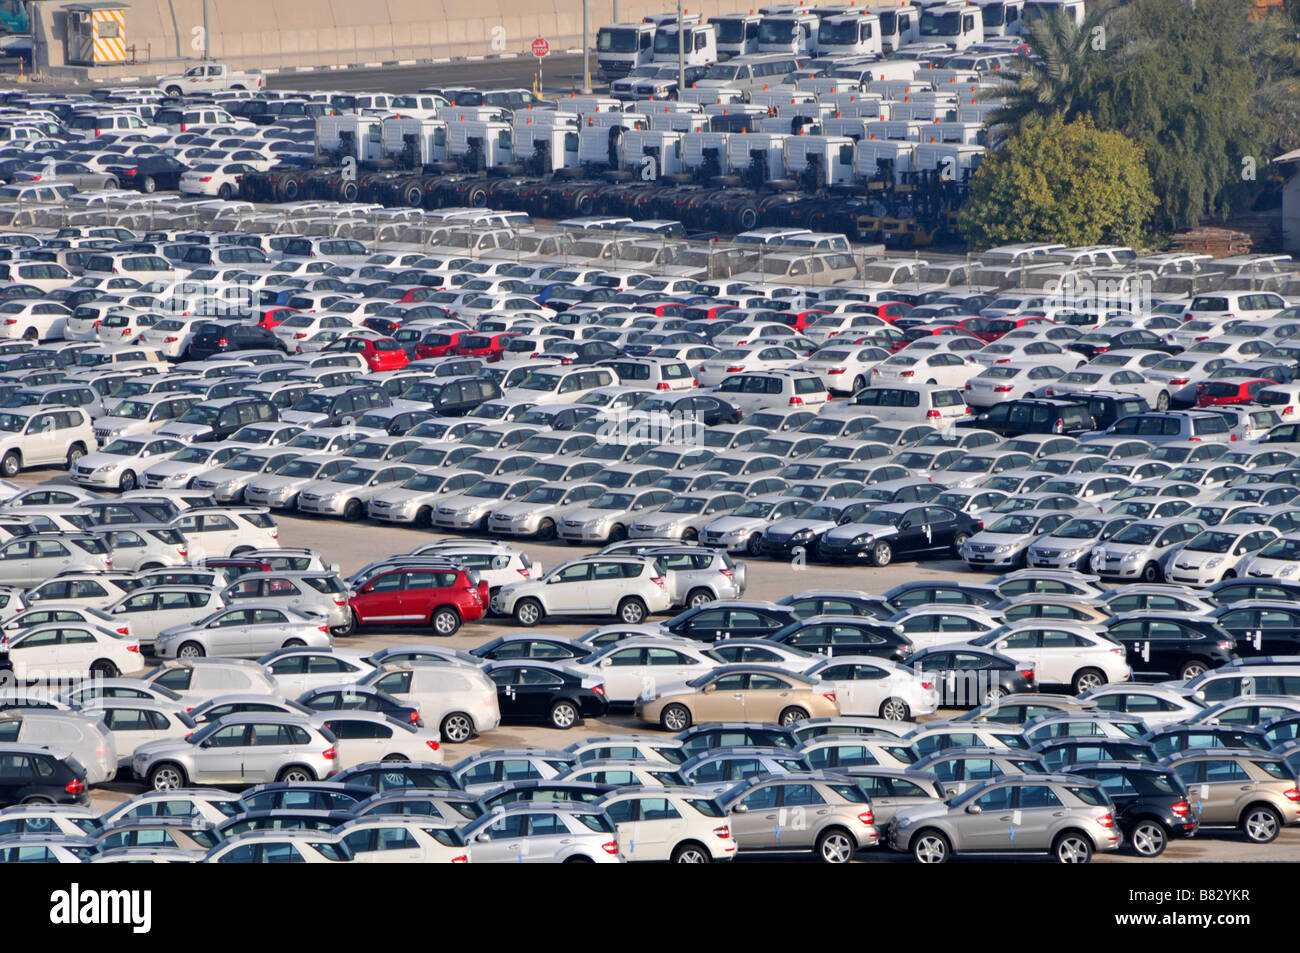 Abu Dhabi looking down close up on dockside storage of imported new cars and trucks awaiting distribution Stock Photo